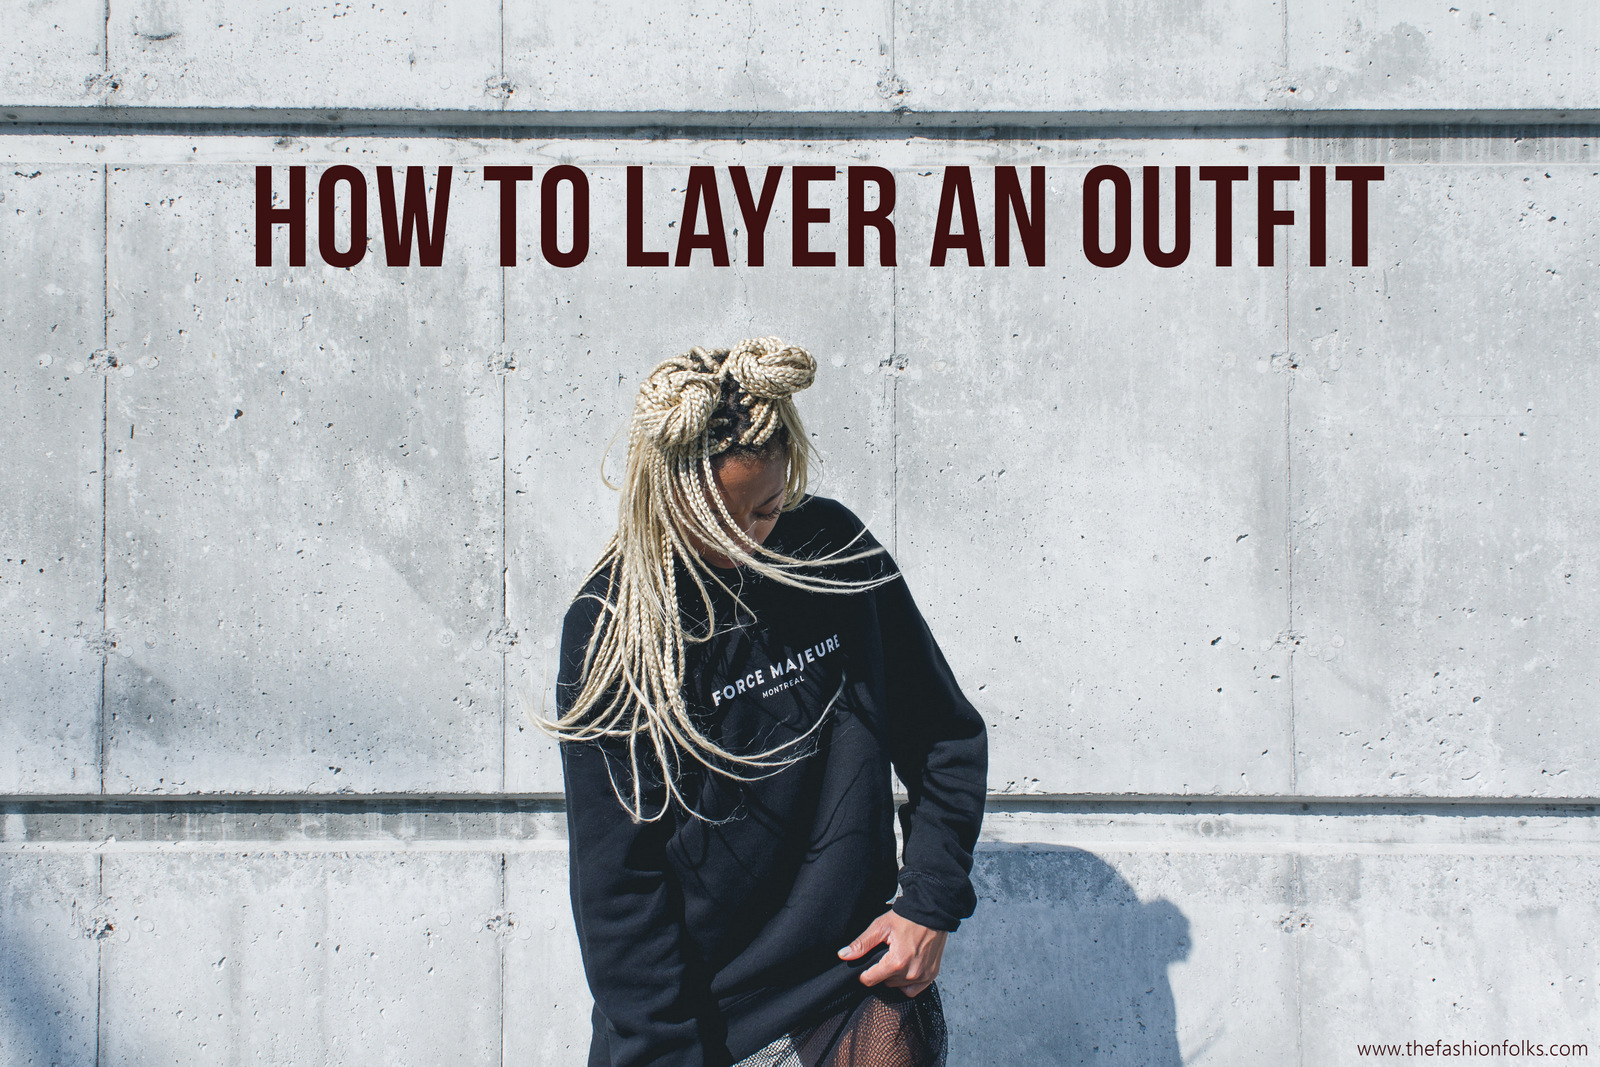 How To Layer An Outfit - Layering Spring Clothes